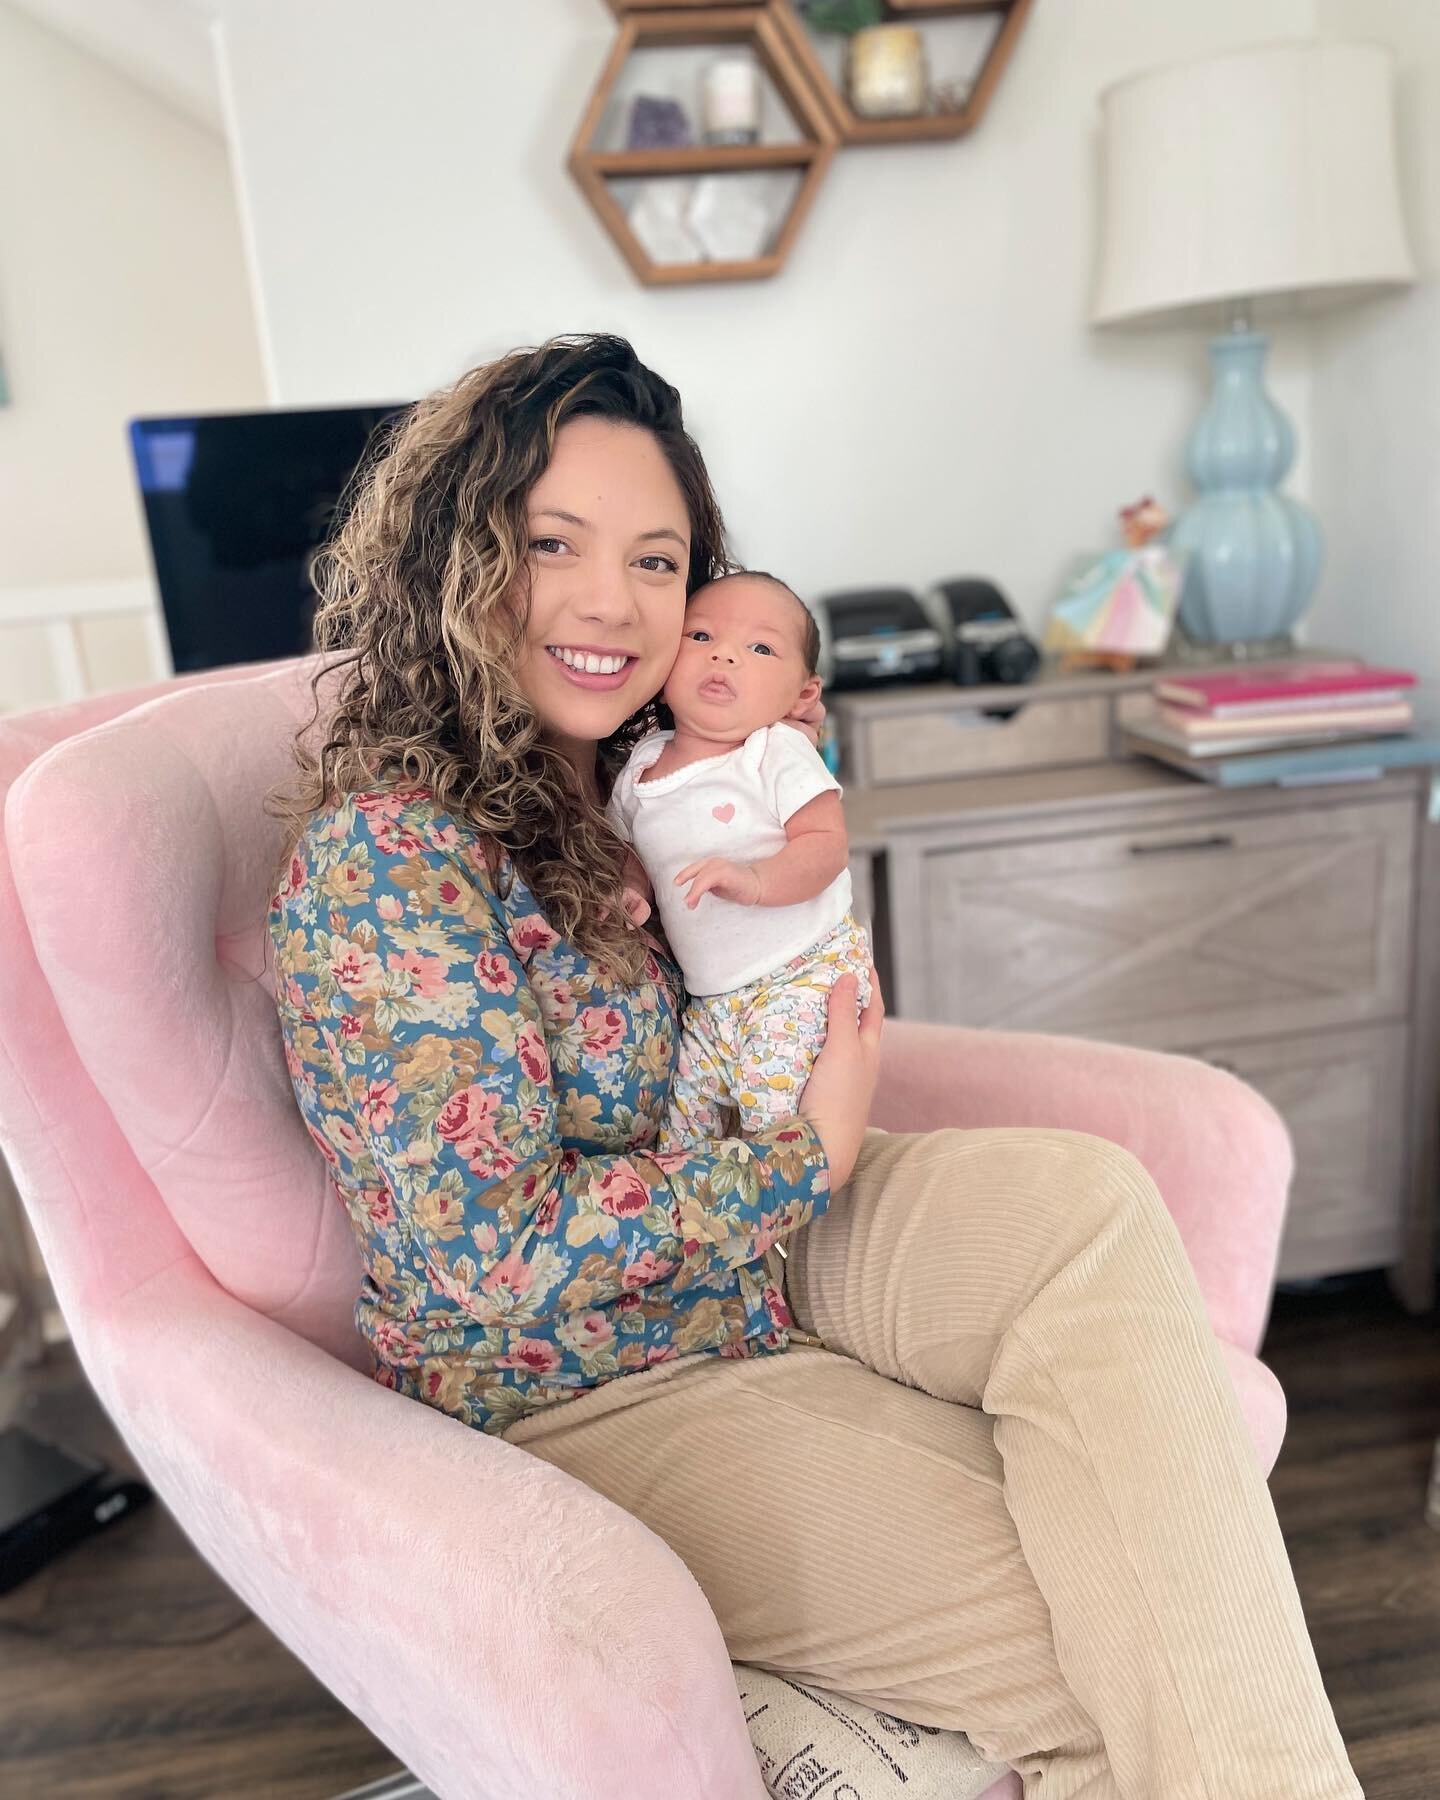 What I&rsquo;ve been up to&hellip;snuggling with baby Harper. 🥰 Hi all! We have a new member in our Online Boutique Boss family! 😉In case you missed the news from my personal Instagram @itsmonikarose, Harper Rose made her arrival just over 2 weeks 